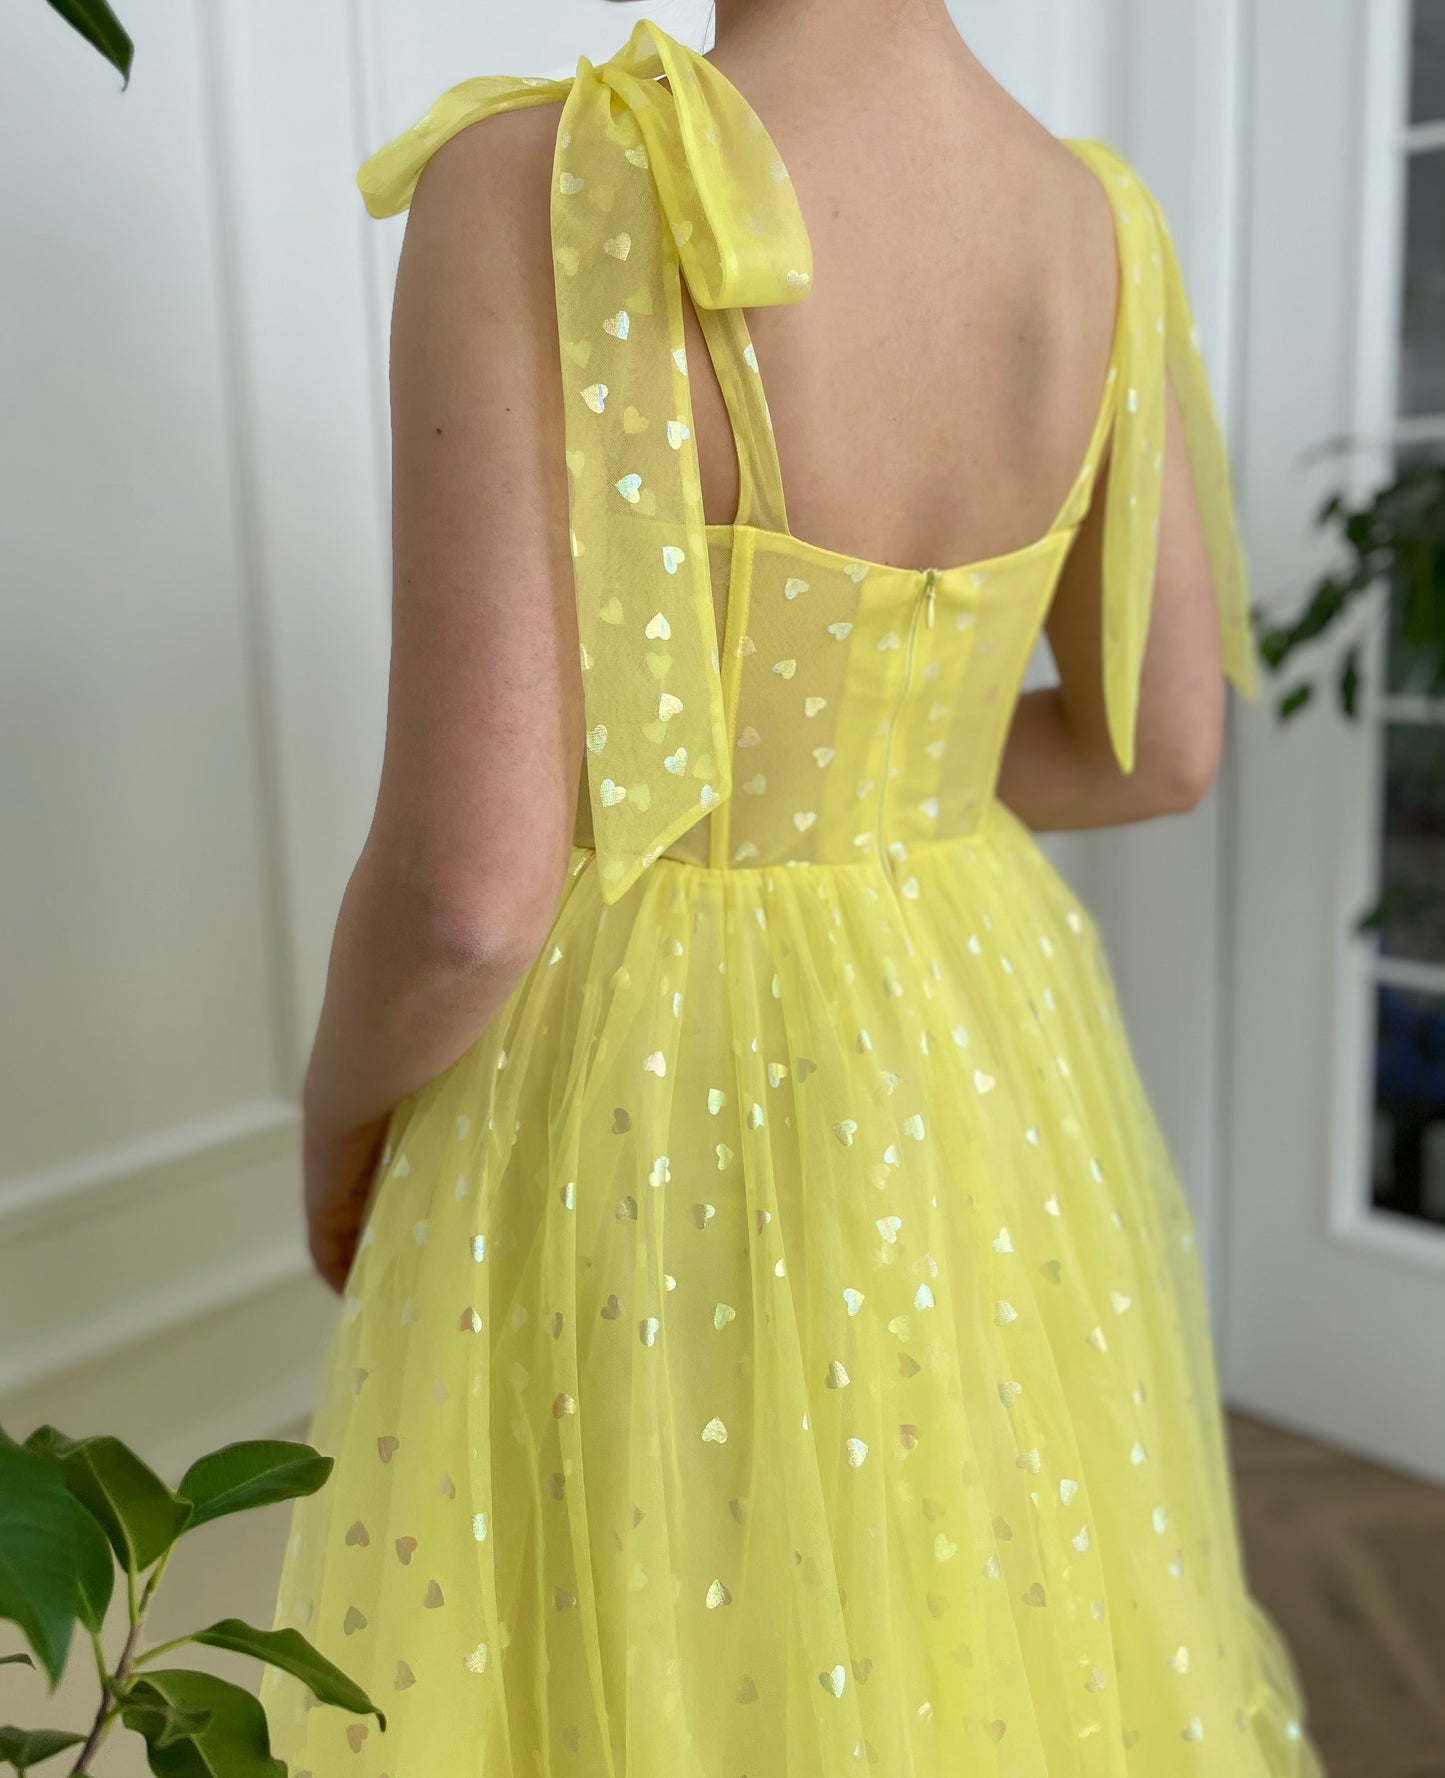 Yellow midi dress with bow straps and hearty fabric